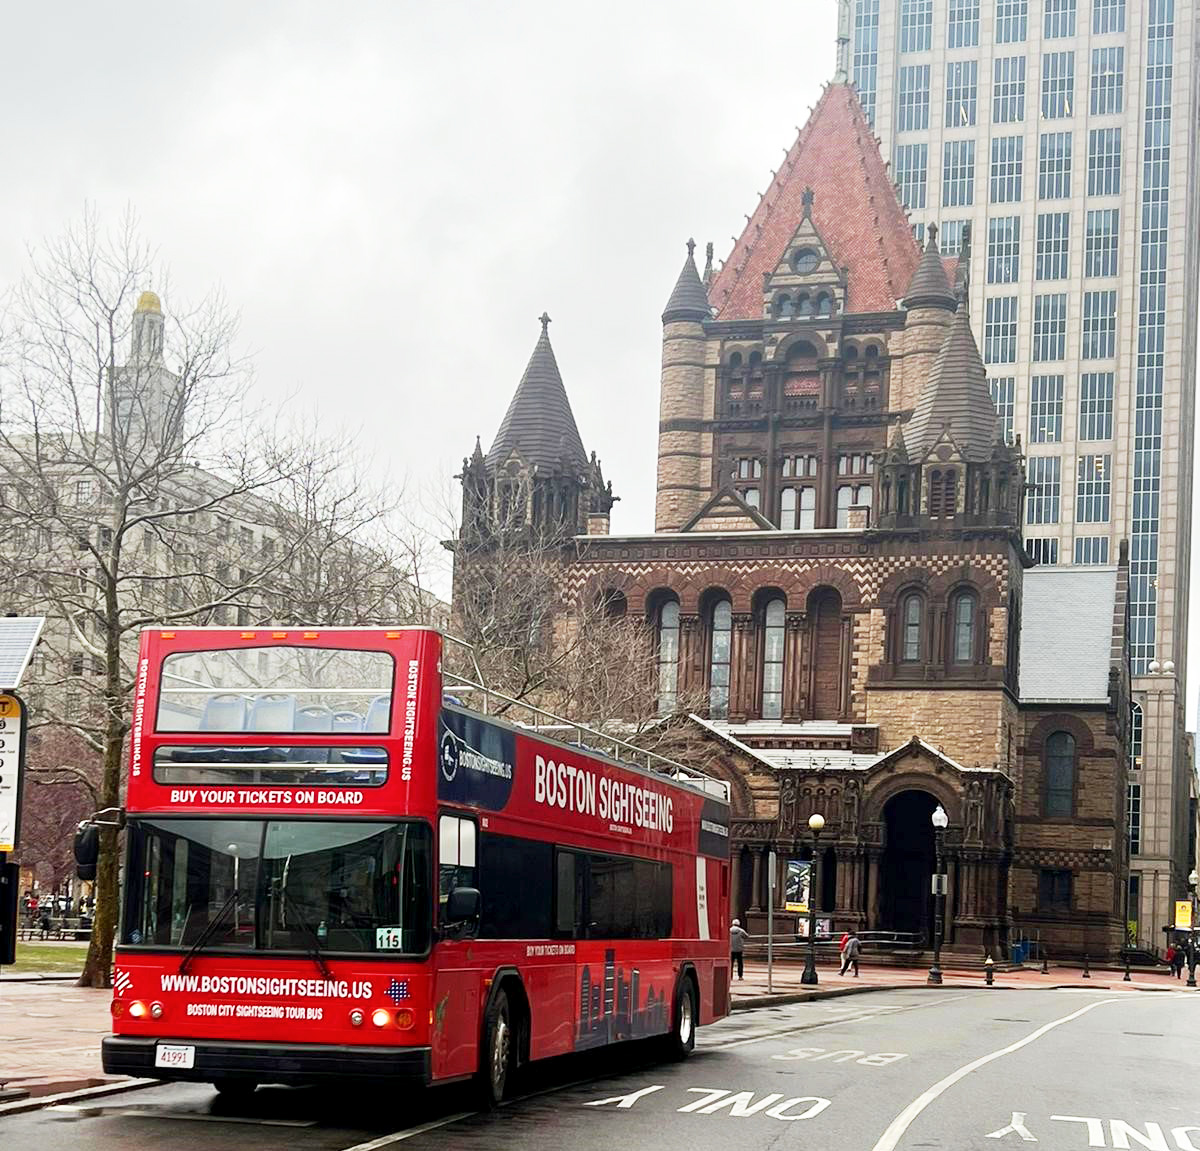 Exploring the best of Boston's past and present from new heights on this double-decker tour 🚌🏛️ #TrinityChurch #BostonSightseeing #DoubleDeckerFun #BostonSightseeing   #Boston   #sightseeing   #hoponhopoffbustour   #doubledeckerbusboston   #citytourboston